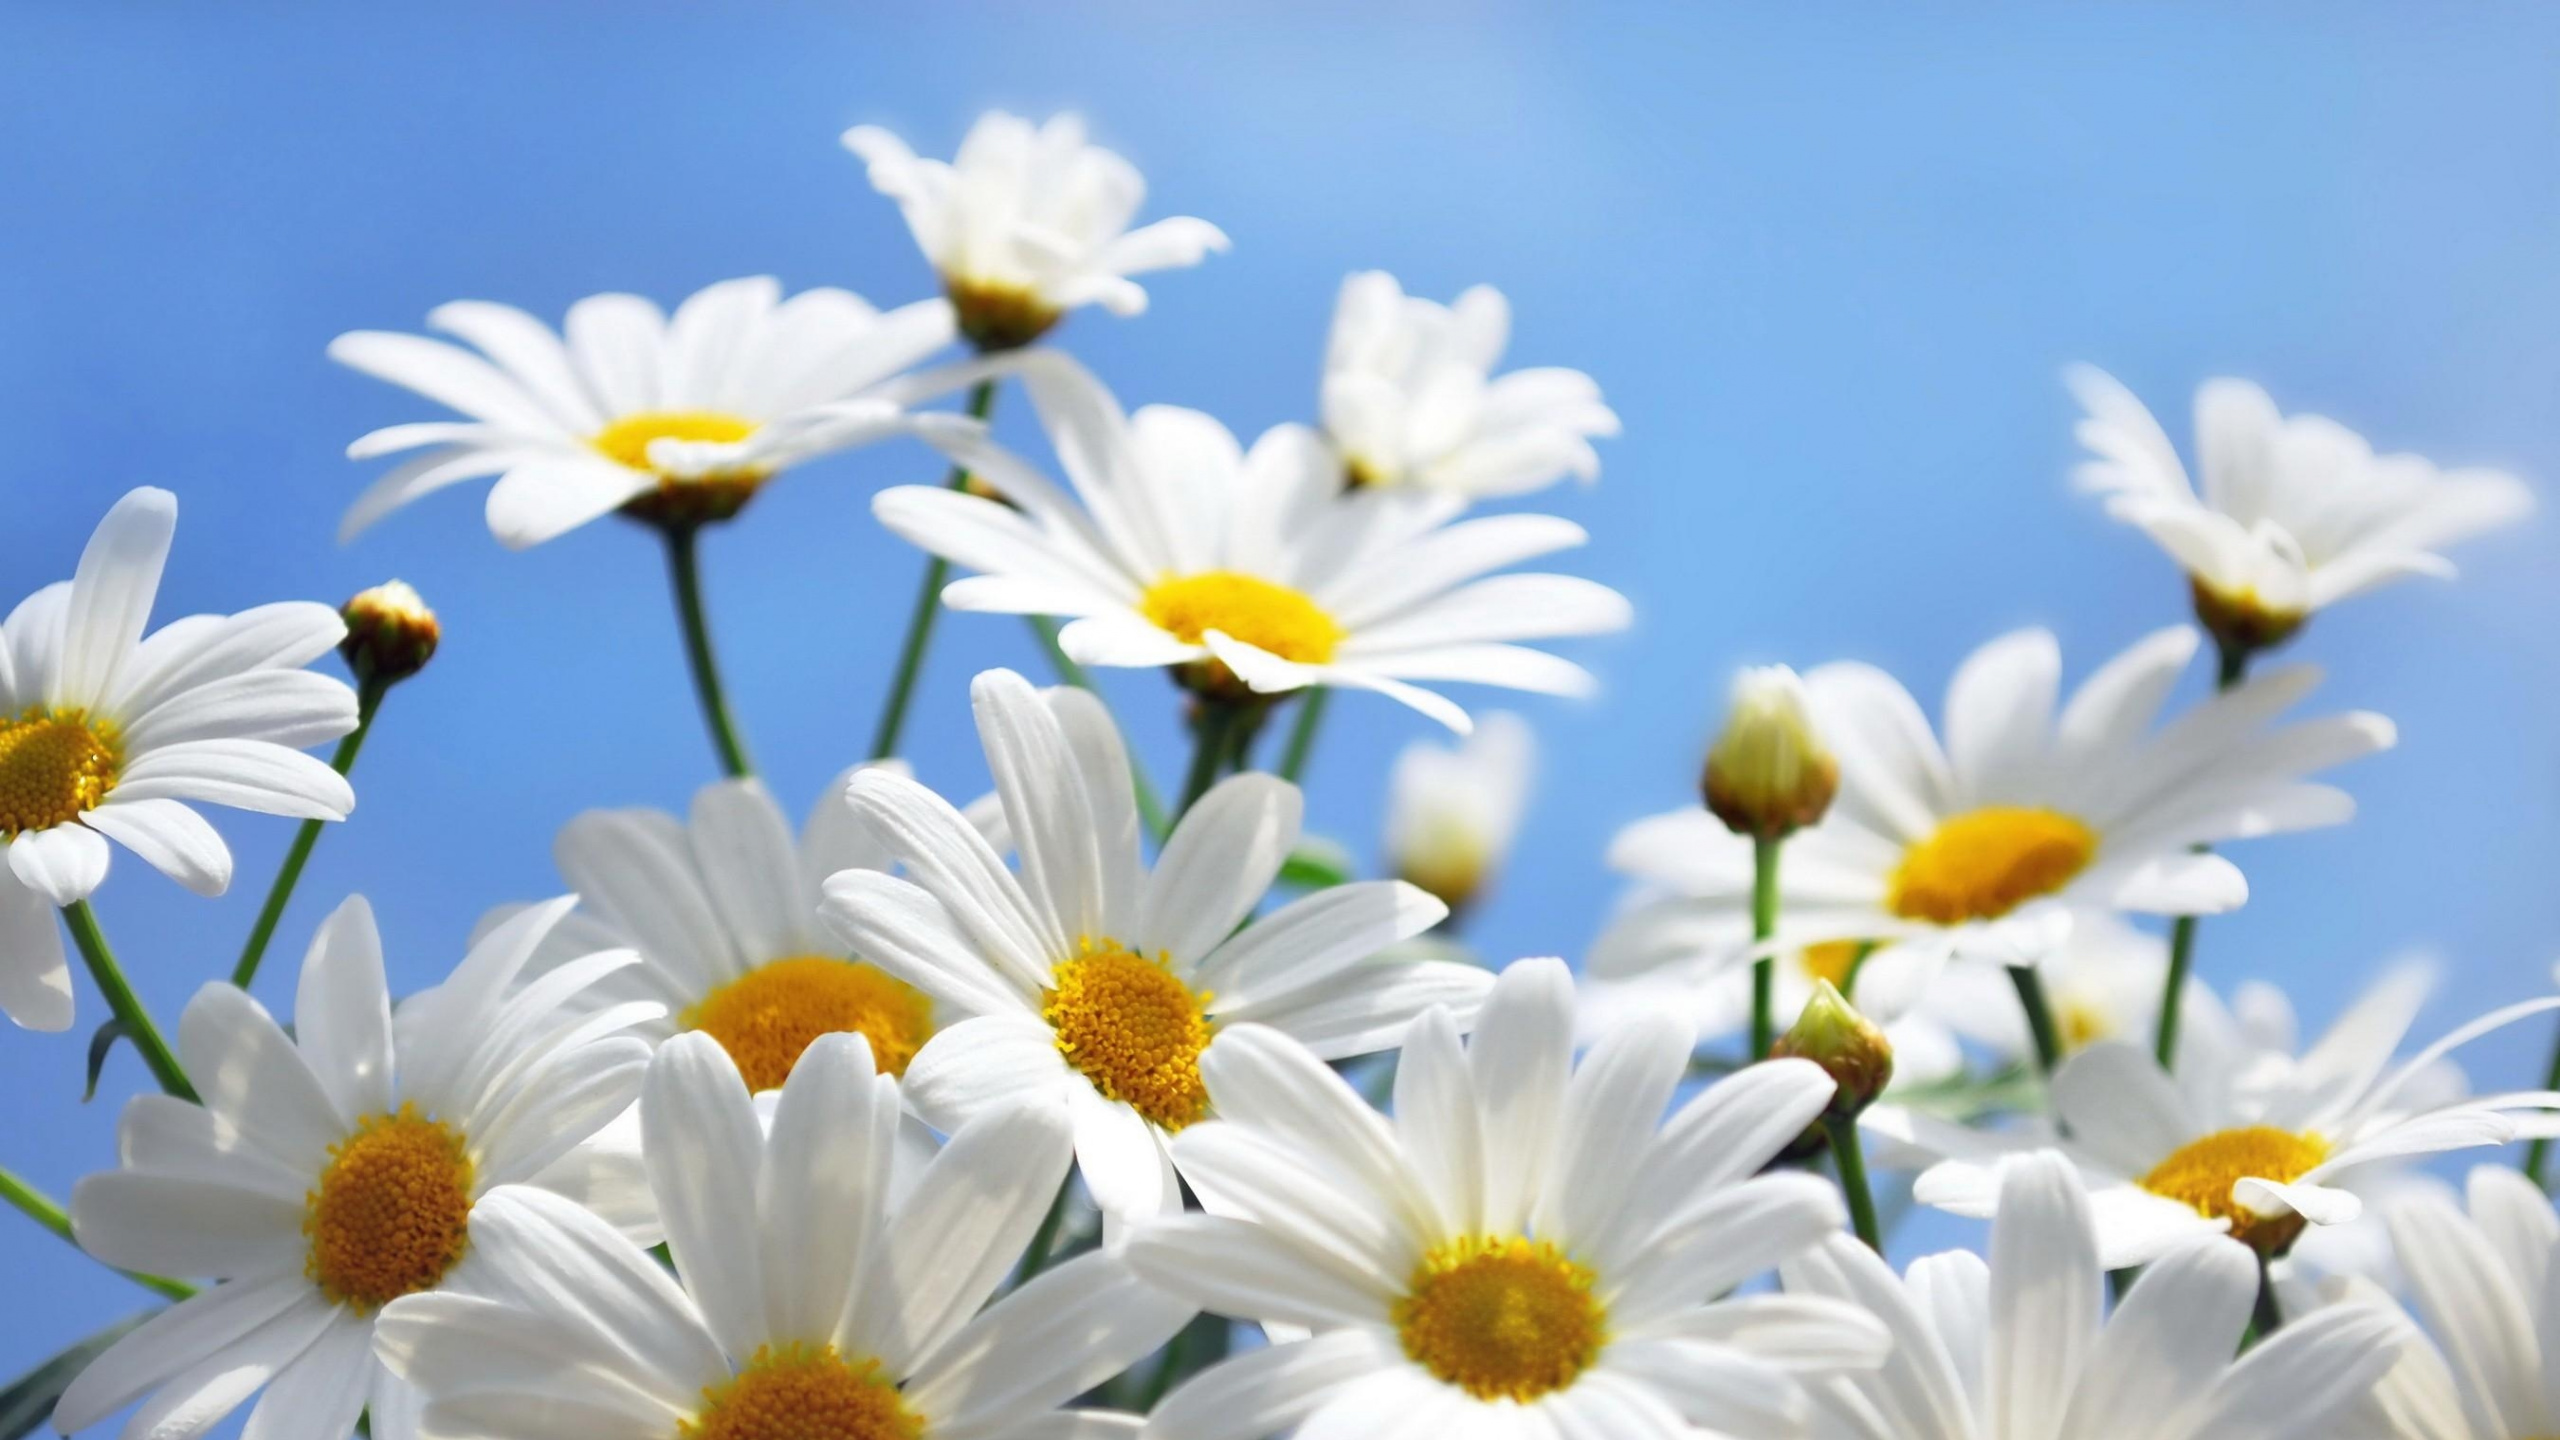 White and Yellow Daisy Flowers. Wallpaper in 2560x1440 Resolution